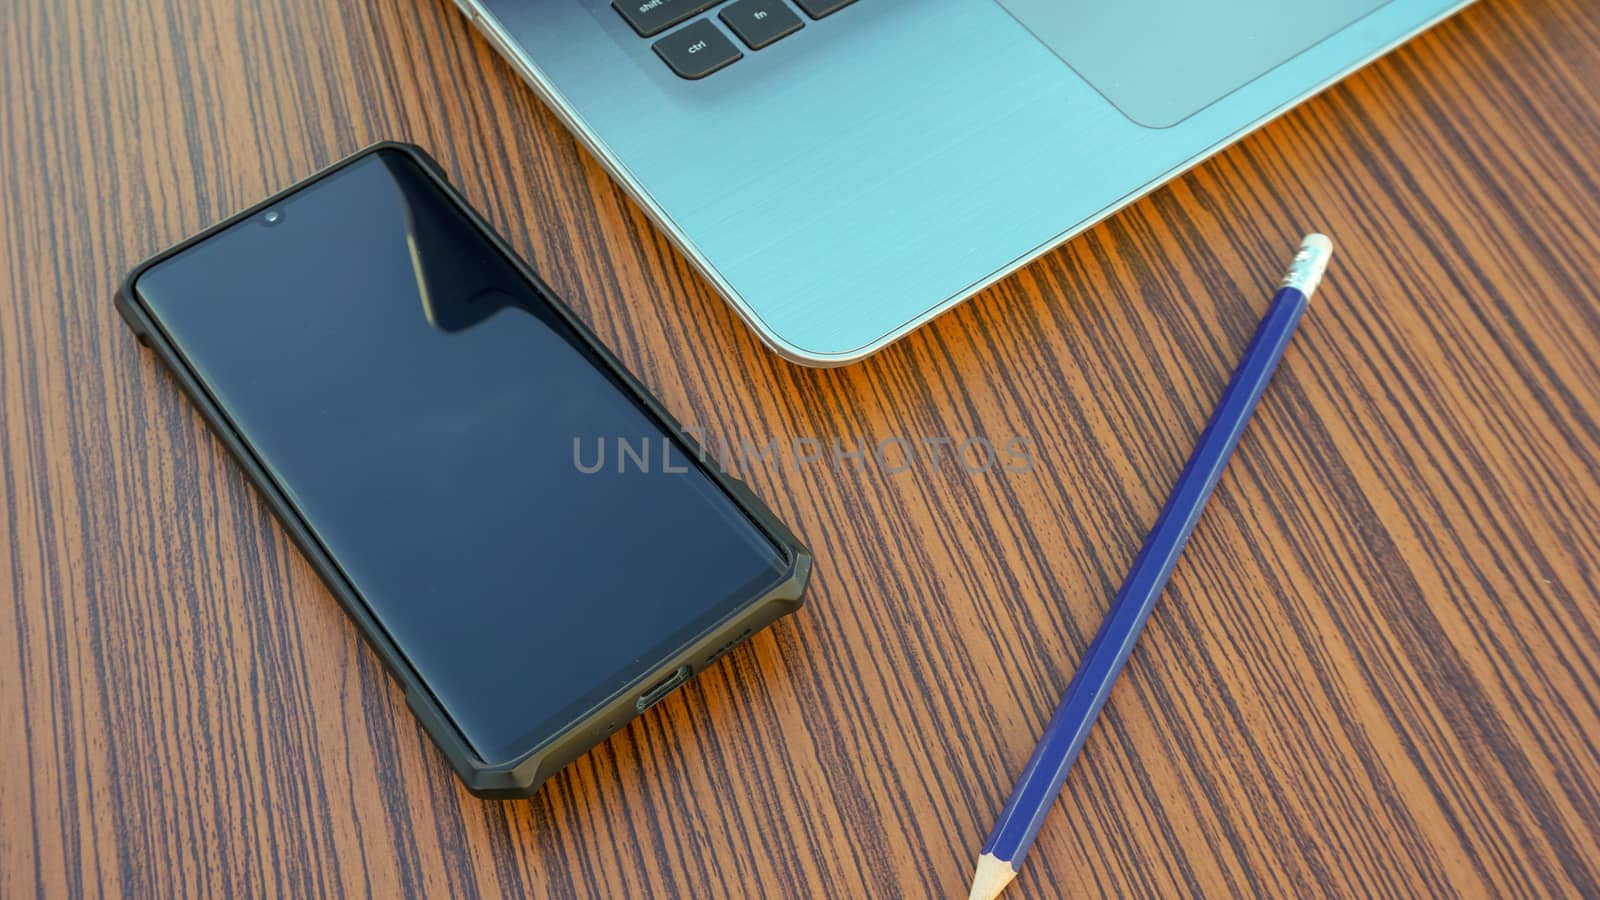 Computer notebook with black smartphone and a blue pencil on a wooden desk.